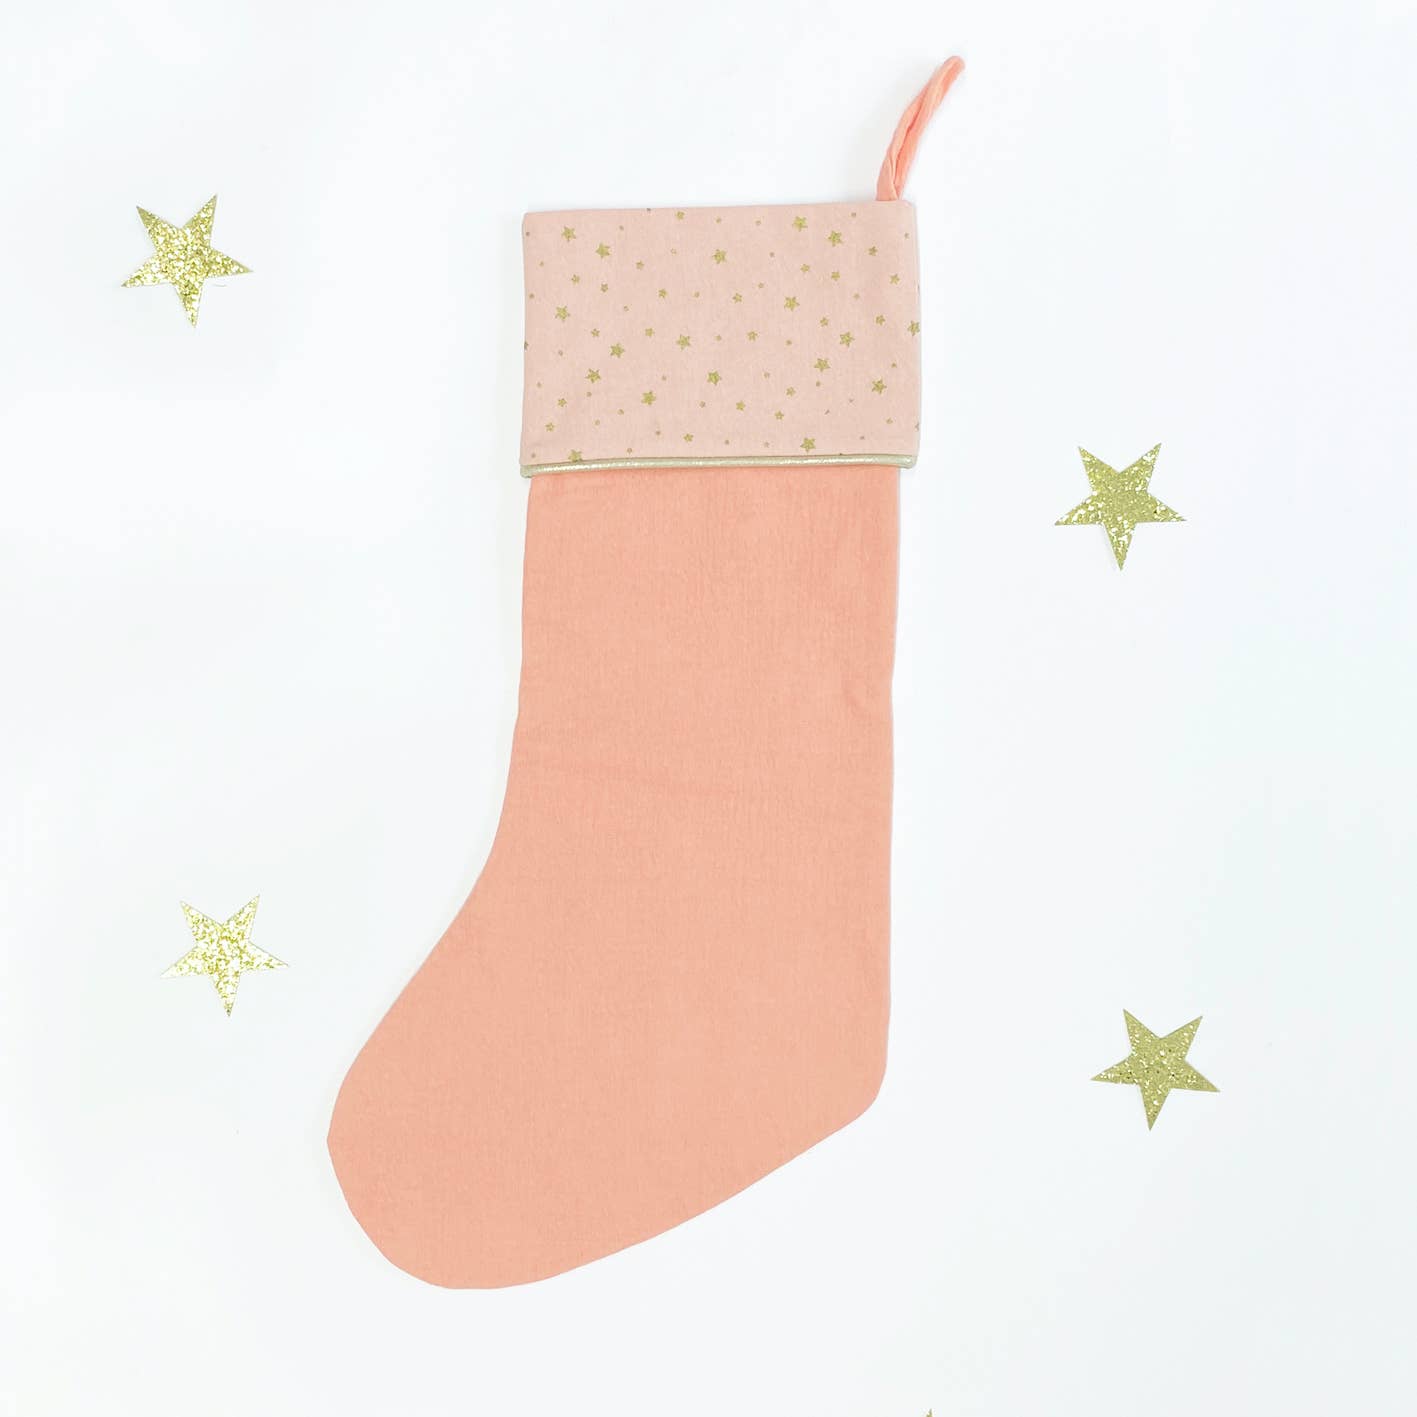 Starry Christmas Stocking Coral - Pretty Crafty Lady Shop